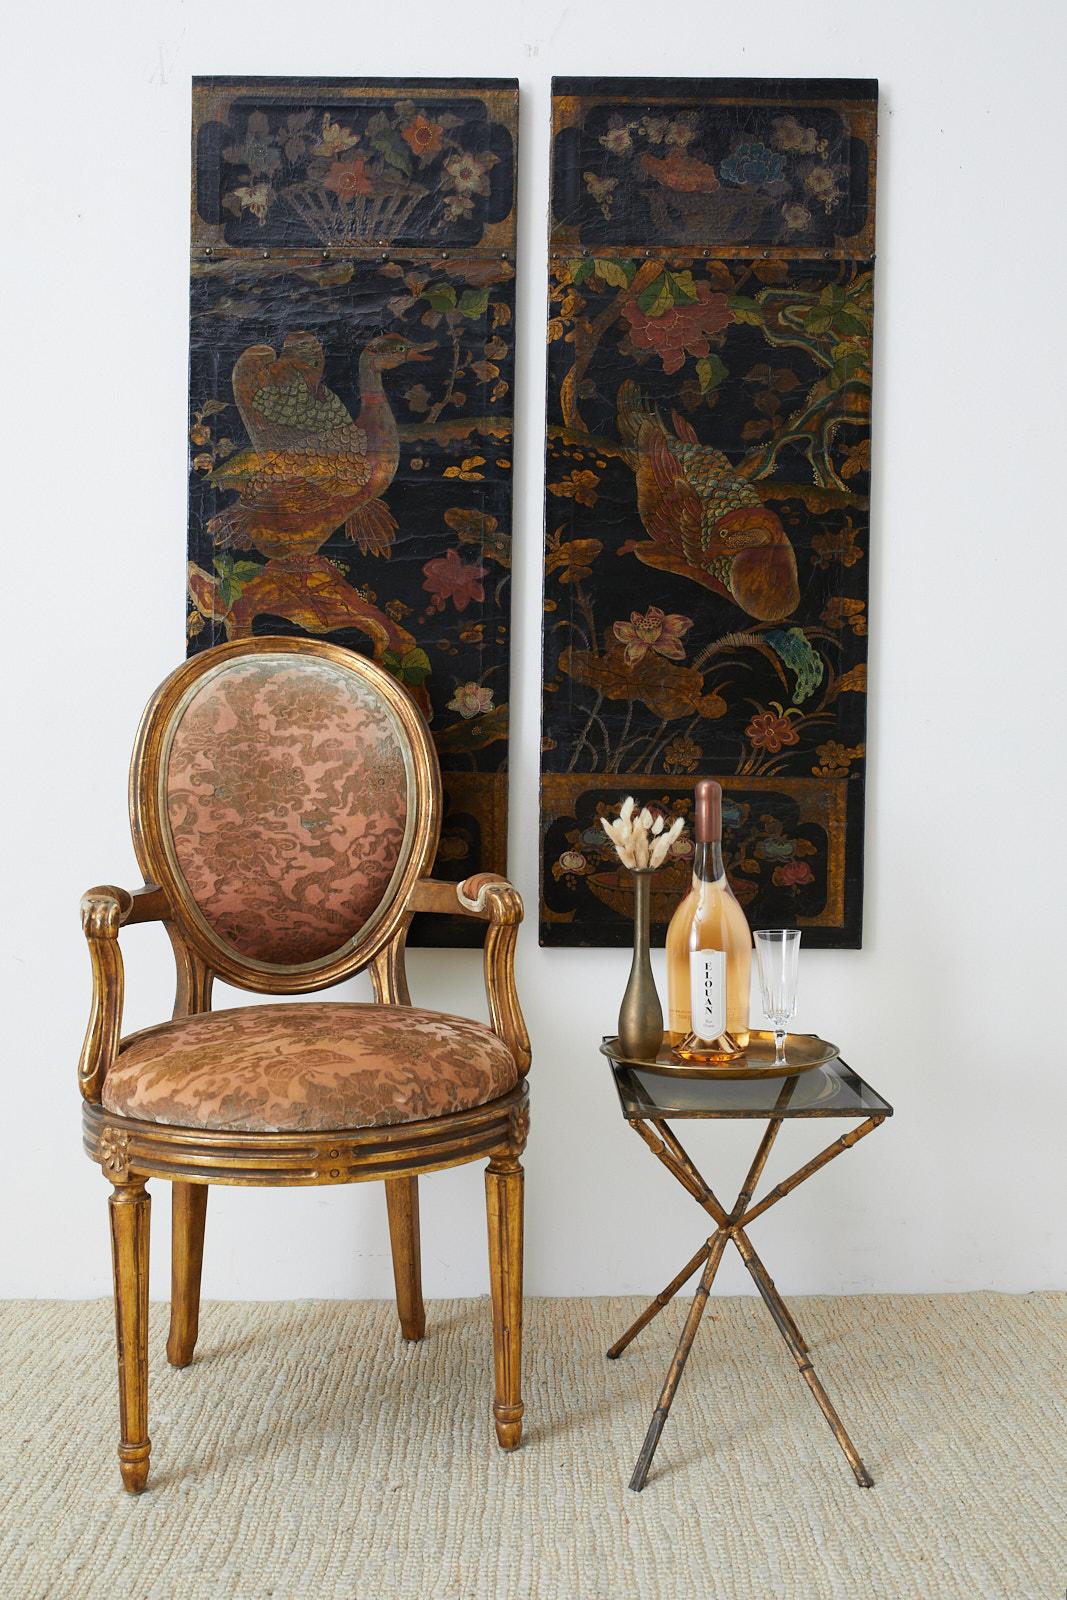 Amazing pair of Chinese polychrome decorated leather panels featuring Koi fish and ducks among beautifully painted flowers and foliage. 19th century frames of wood covered with skin and lacquered with an aged patina and craquelure finish. The tops